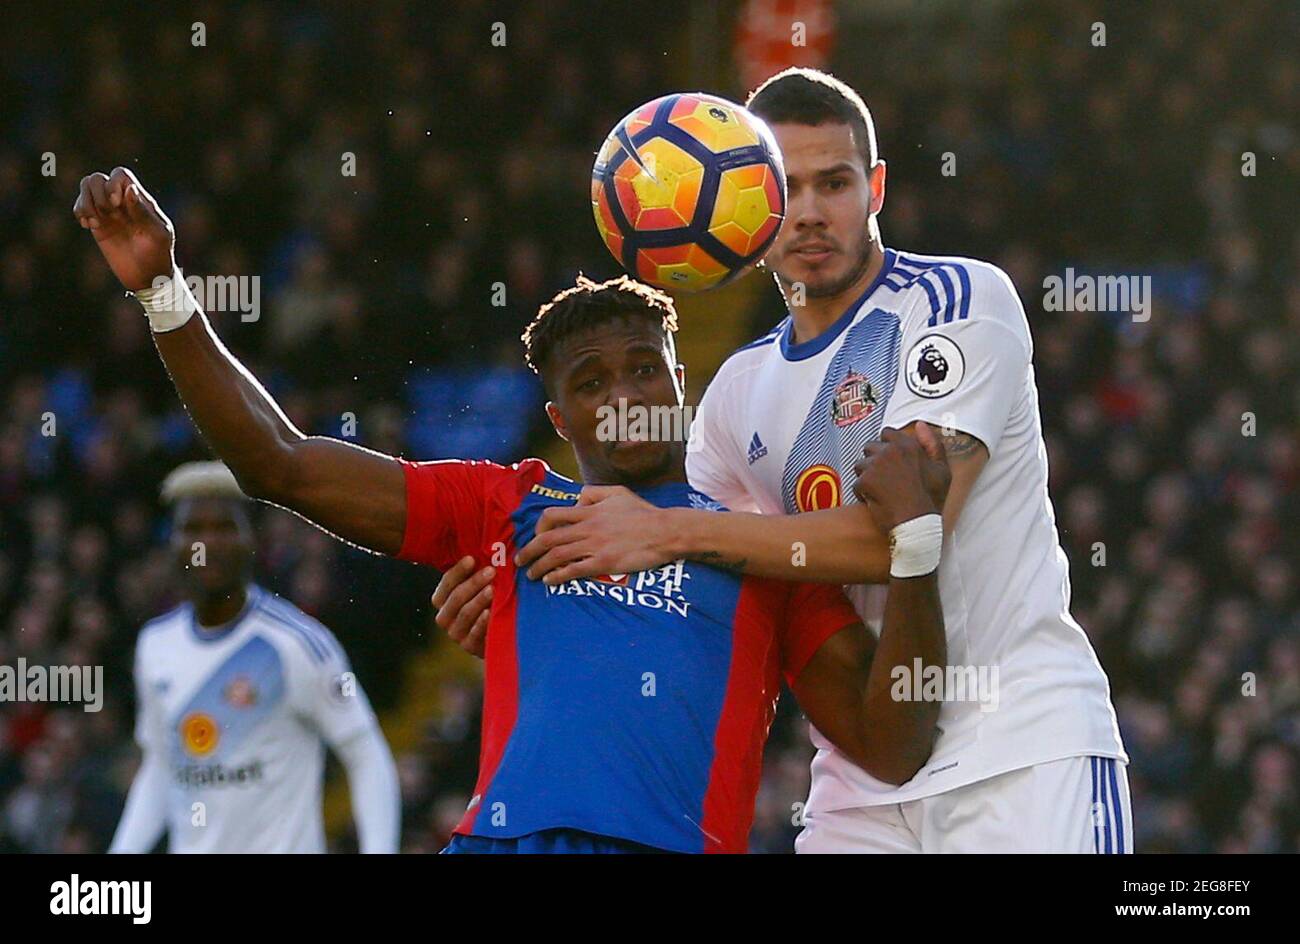 Britain Football Soccer - Crystal Palace v Sunderland - Premier League - Selhurst Park - 4/2/17 Crystal Palace's Wilfried Zaha in action with Sunderland's Jack Rodwell  Reuters / Andrew Winning Livepic EDITORIAL USE ONLY. No use with unauthorized audio, video, data, fixture lists, club/league logos or 'live' services. Online in-match use limited to 45 images, no video emulation. No use in betting, games or single club/league/player publications.  Please contact your account representative for further details. Stock Photo